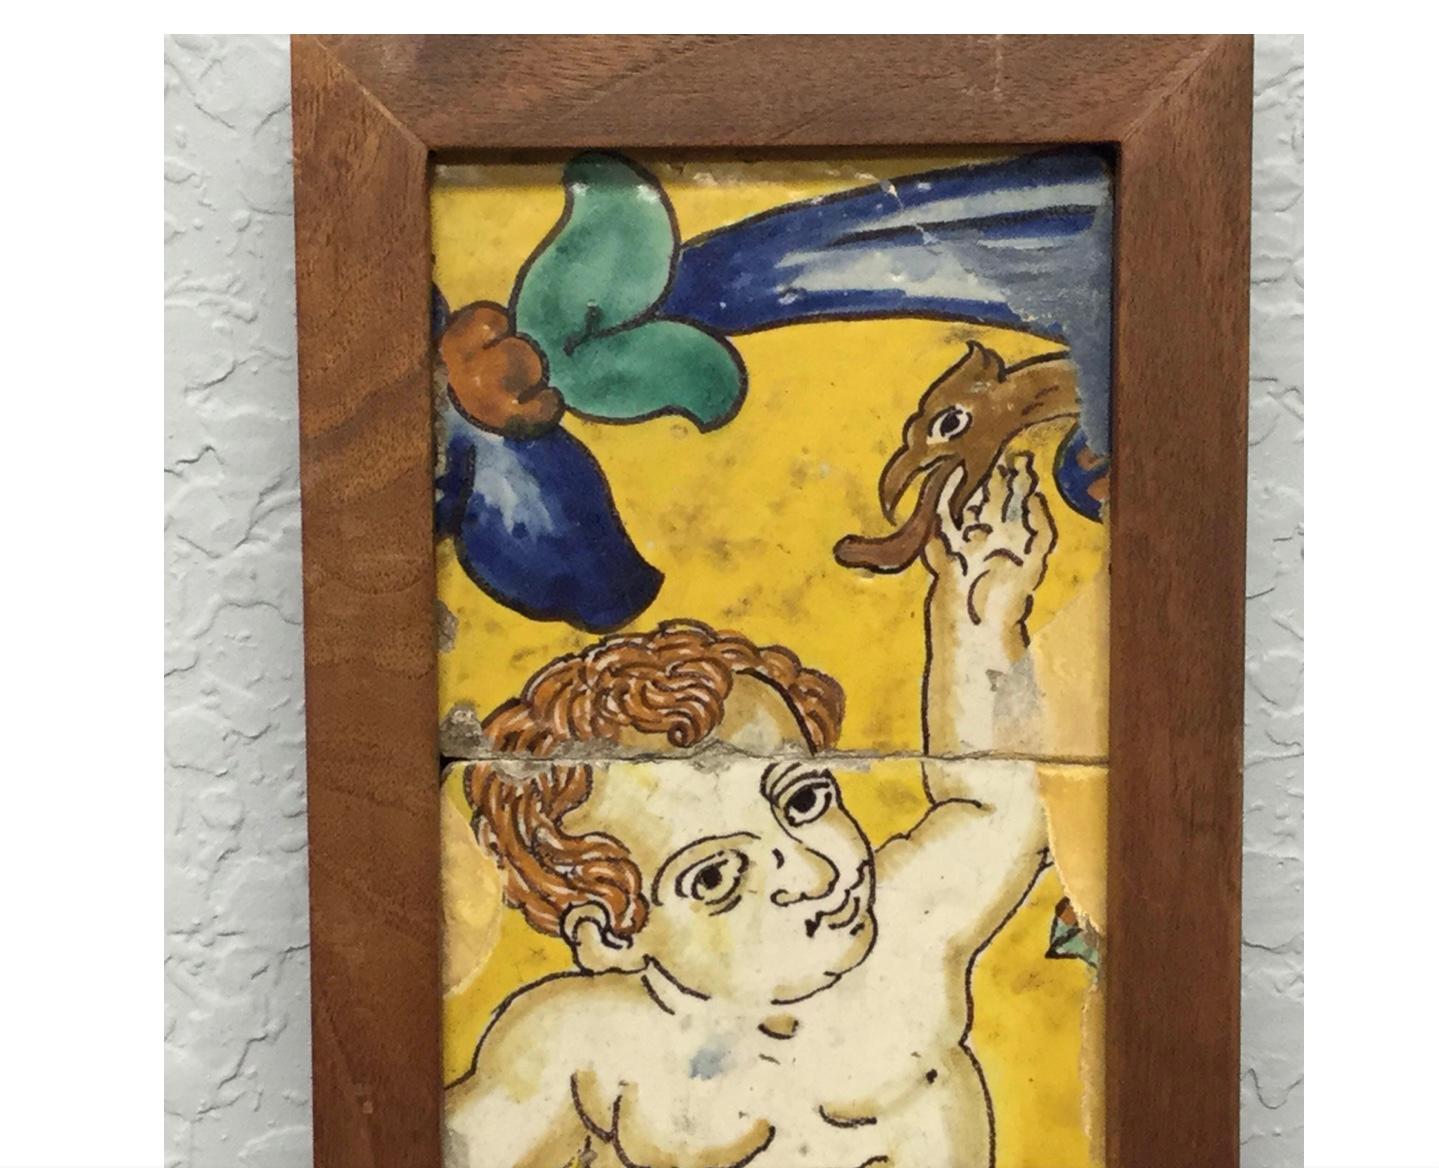 18th Century Italian Majolica Faience Pottery Putto Framed Tiles In Good Condition For Sale In Bradenton, FL